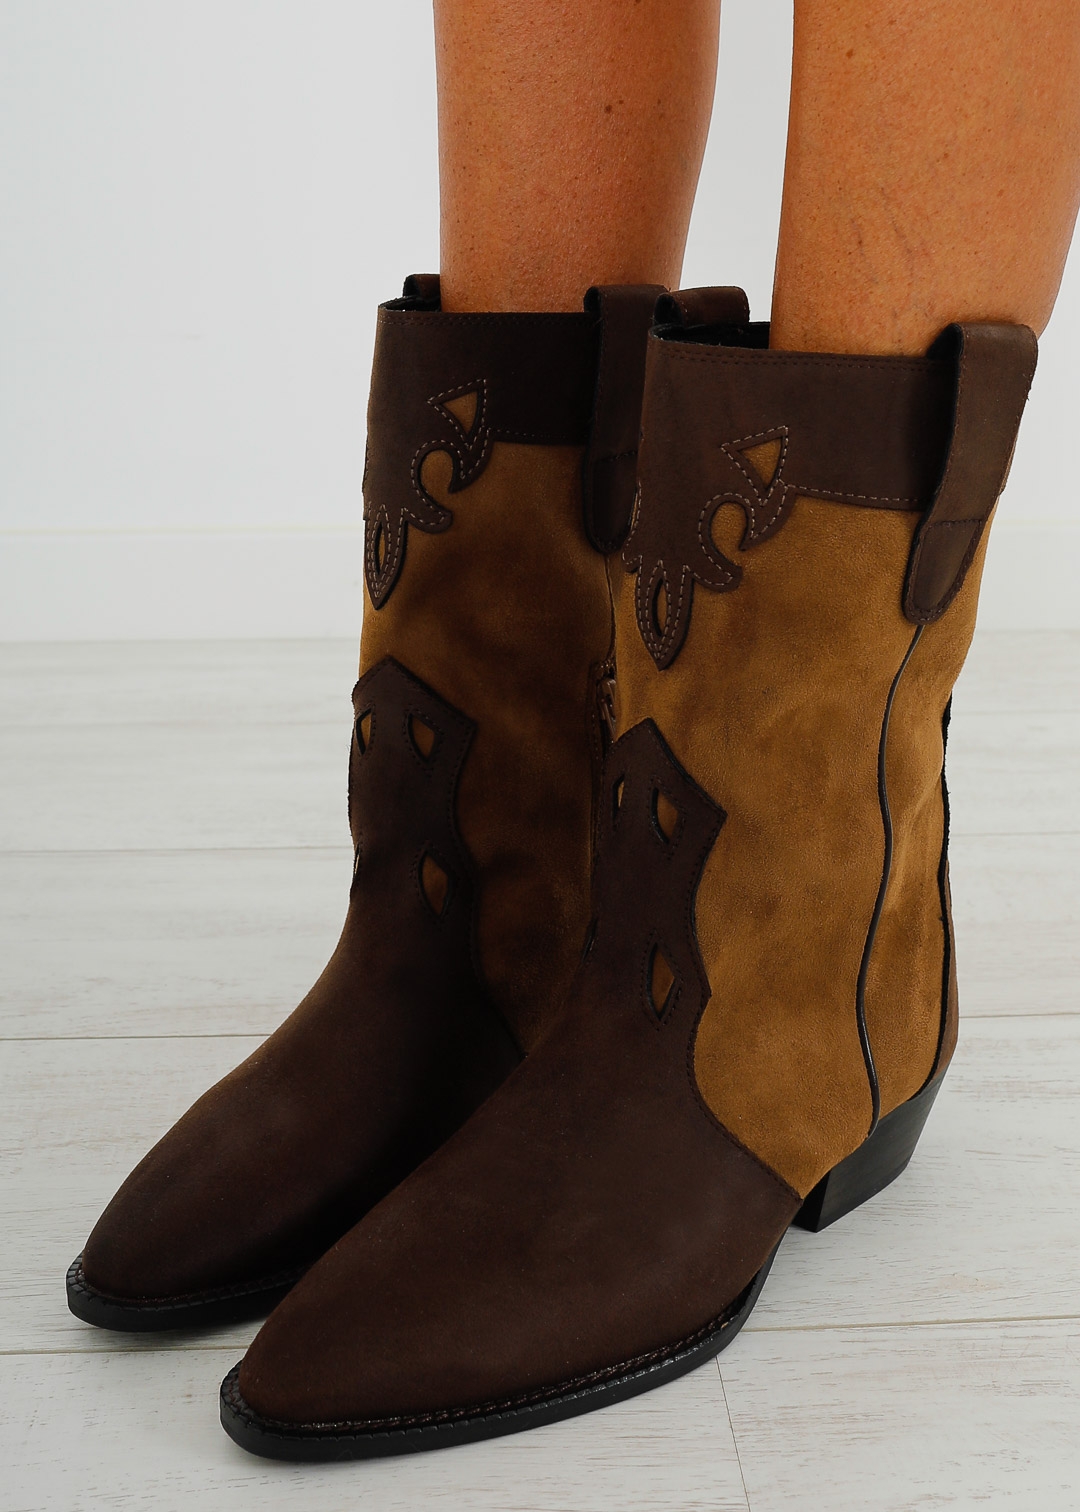 CAMEL COUNTRY BOOTS